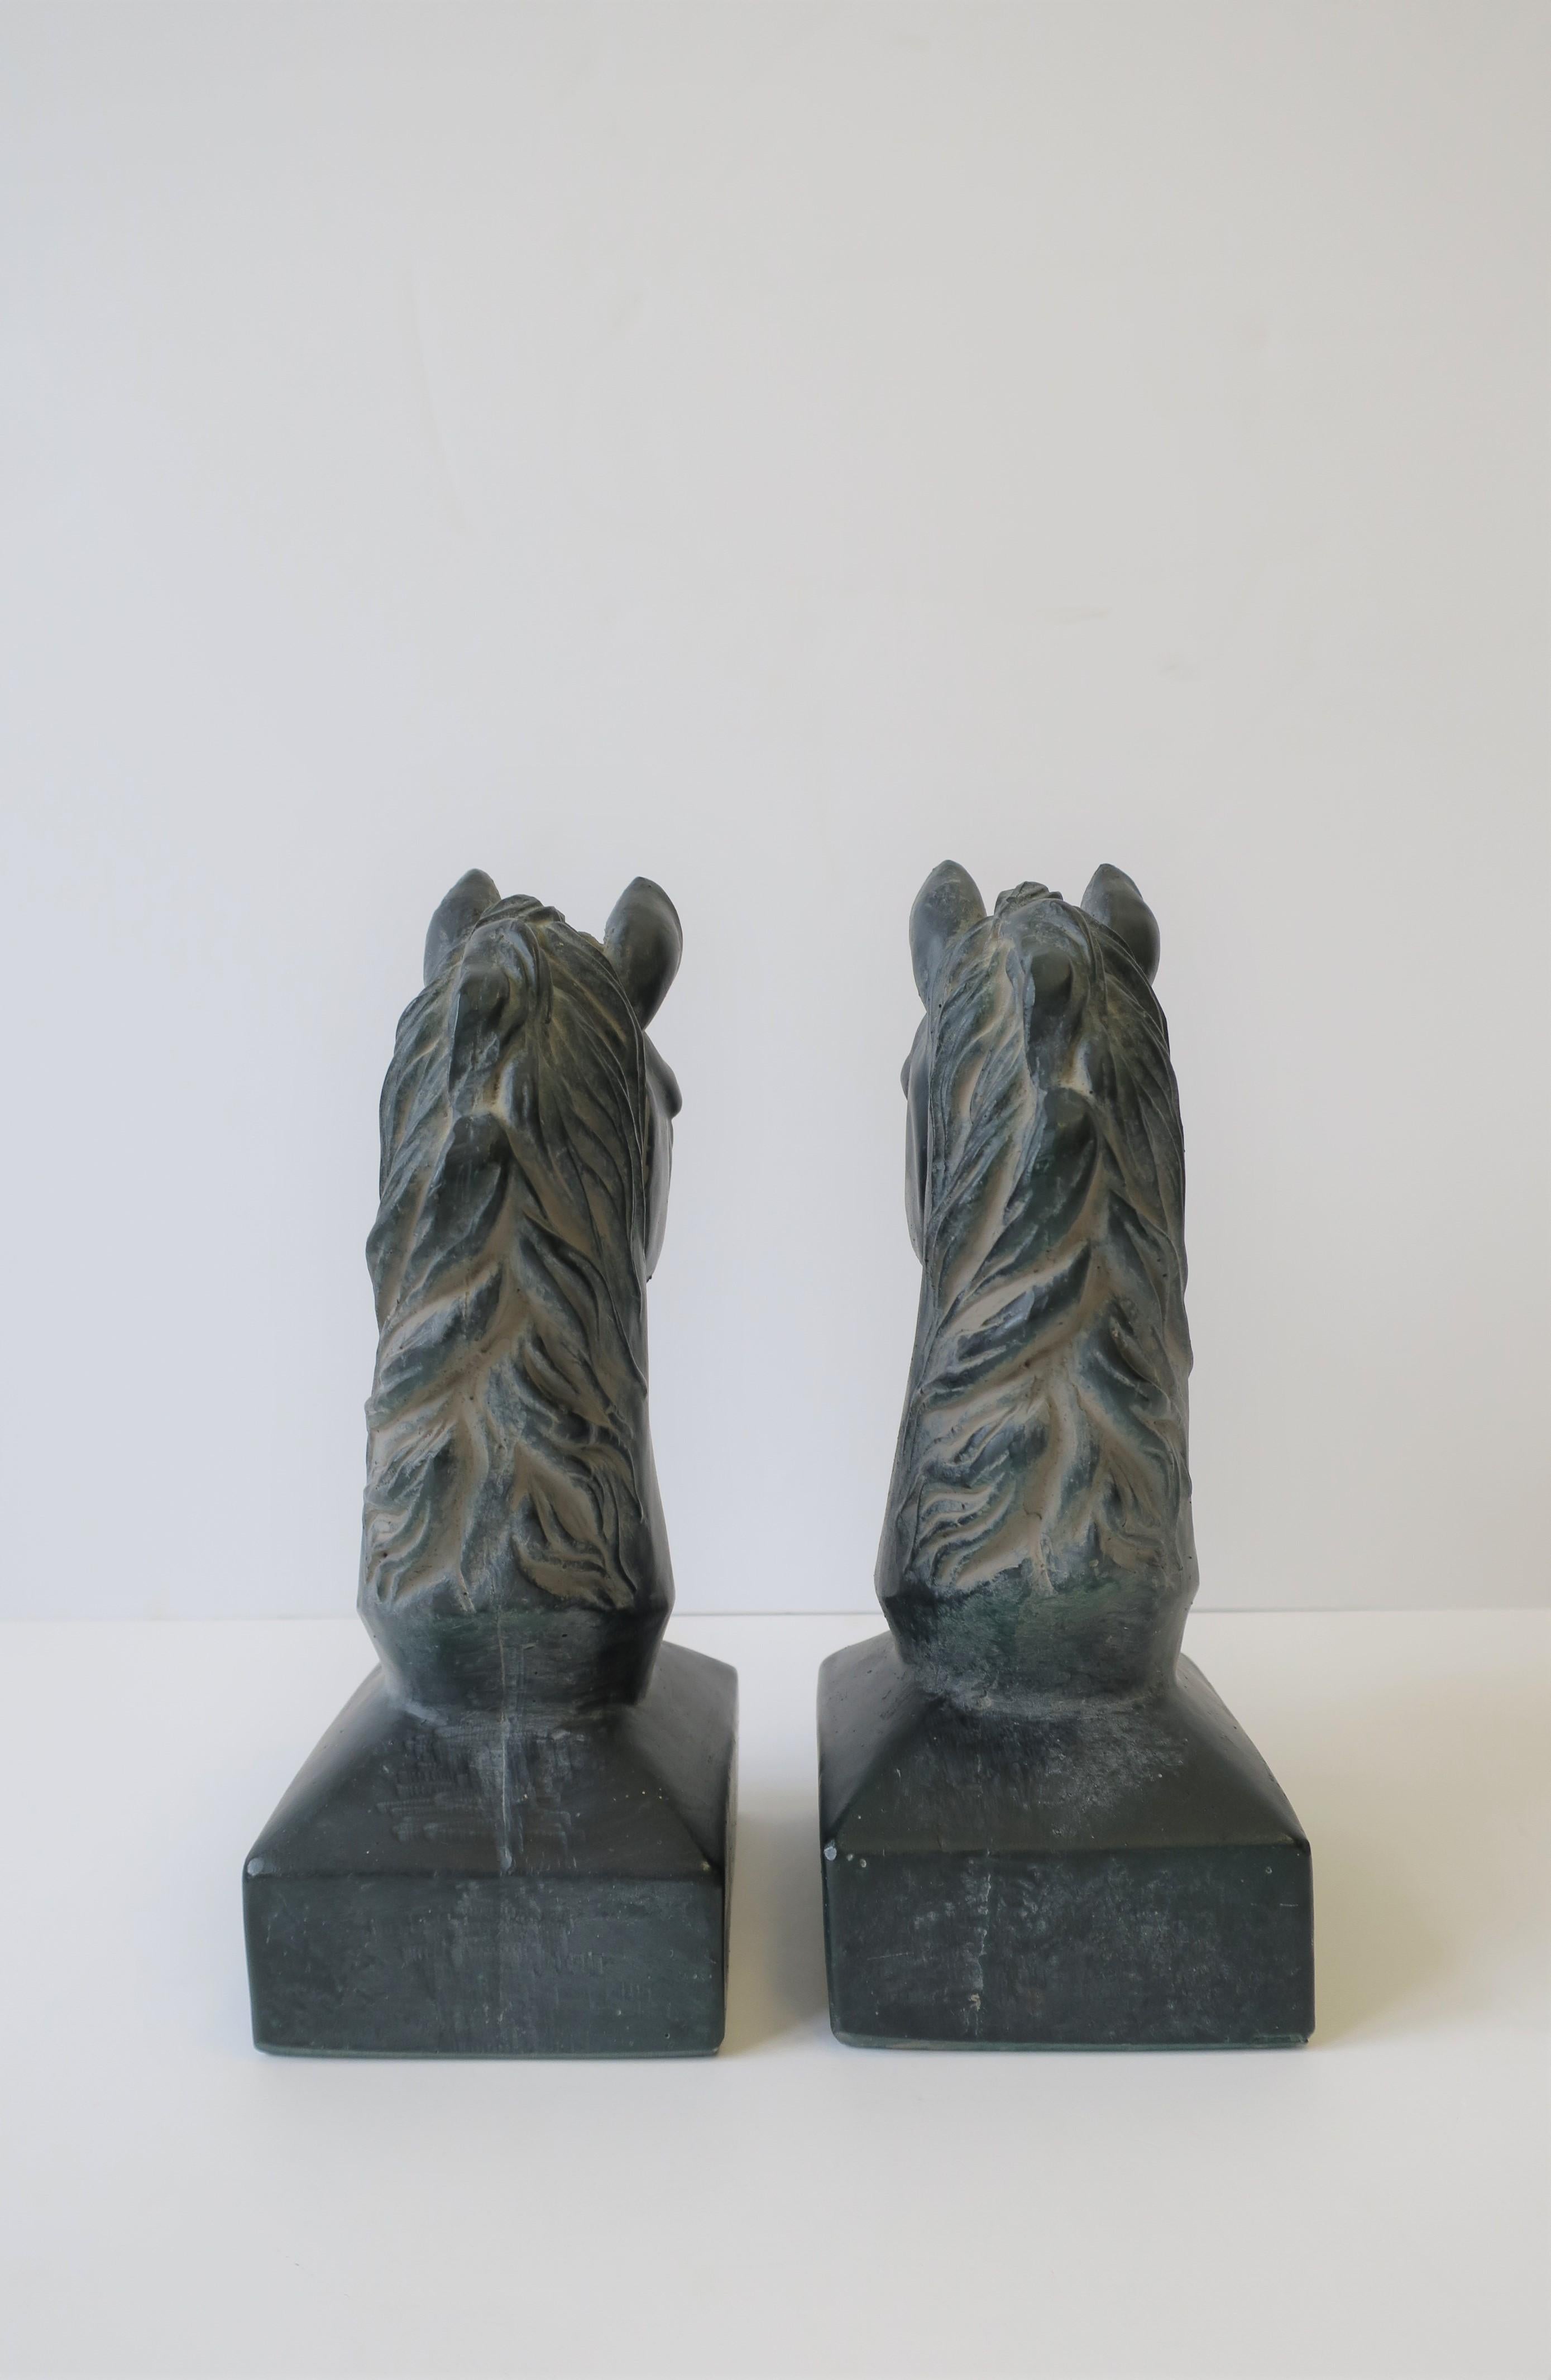 Pair of Vintage Horse or Equine Bookends 1